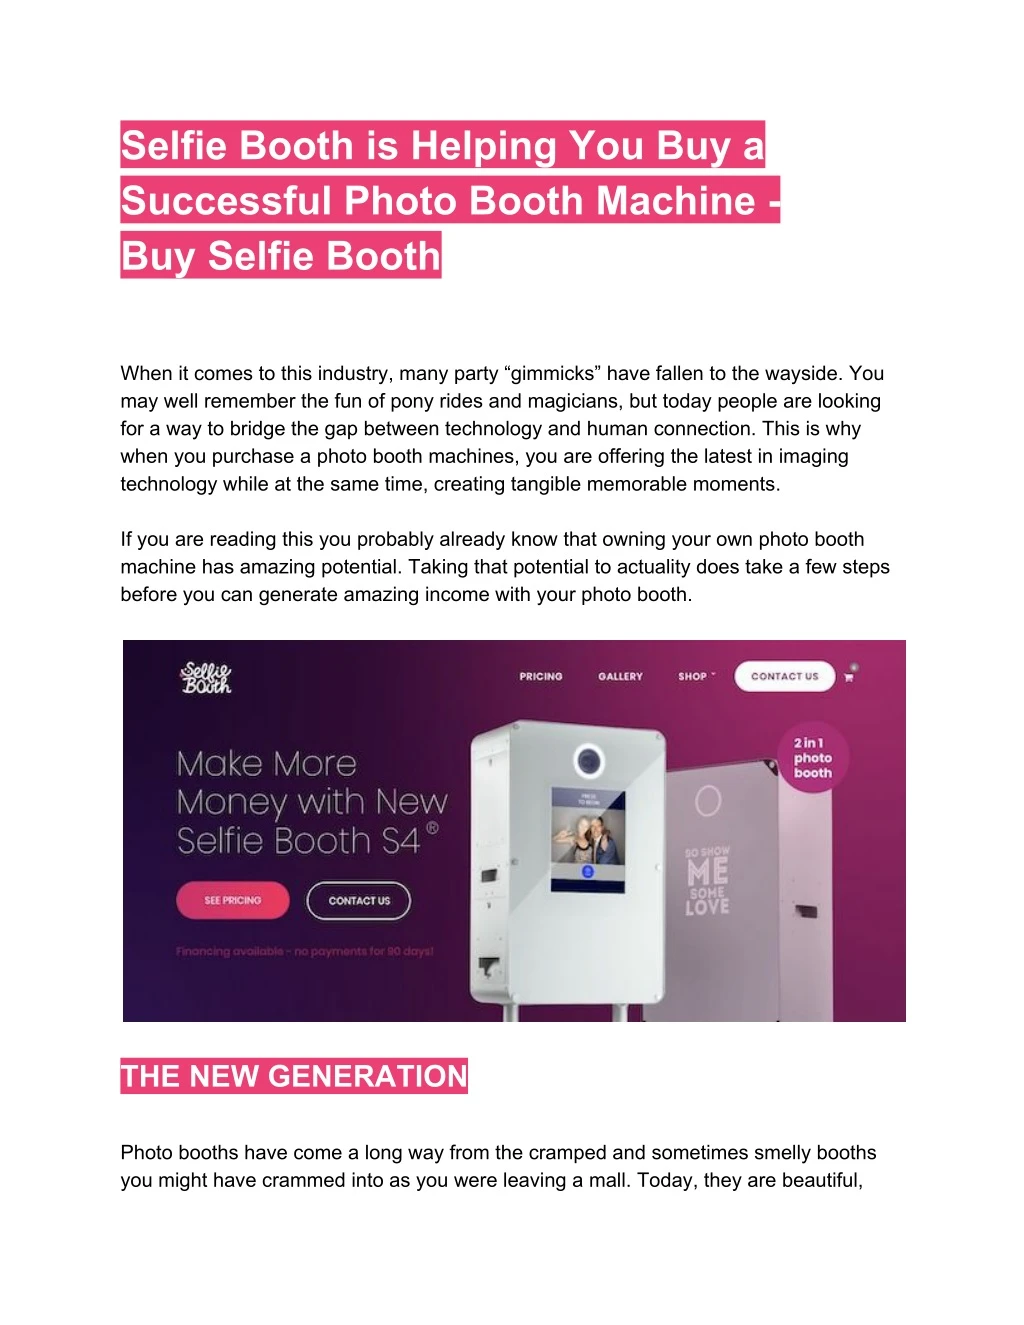 selfie booth is helping you buy a successful